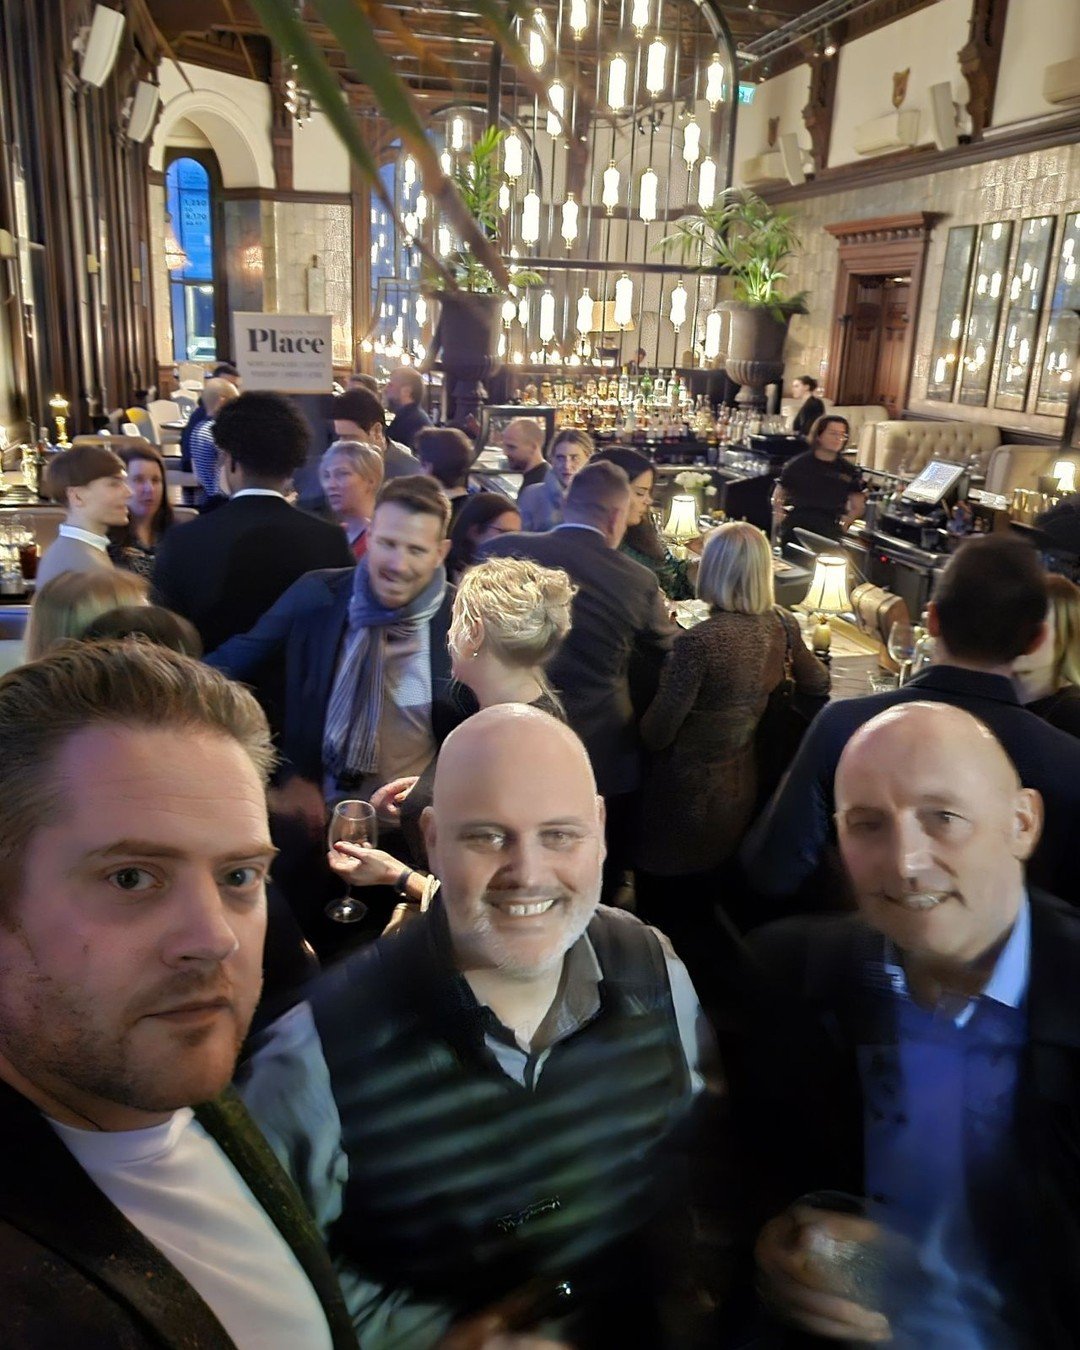 Great atmosphere at the Place North pre-MIPIM social event at Grand Pacific in Manchester last week.
 
The programme is shaping up and the PNW partners are a cracking group. We had plenty of time to catch up with lots of familiar faces and meet some 